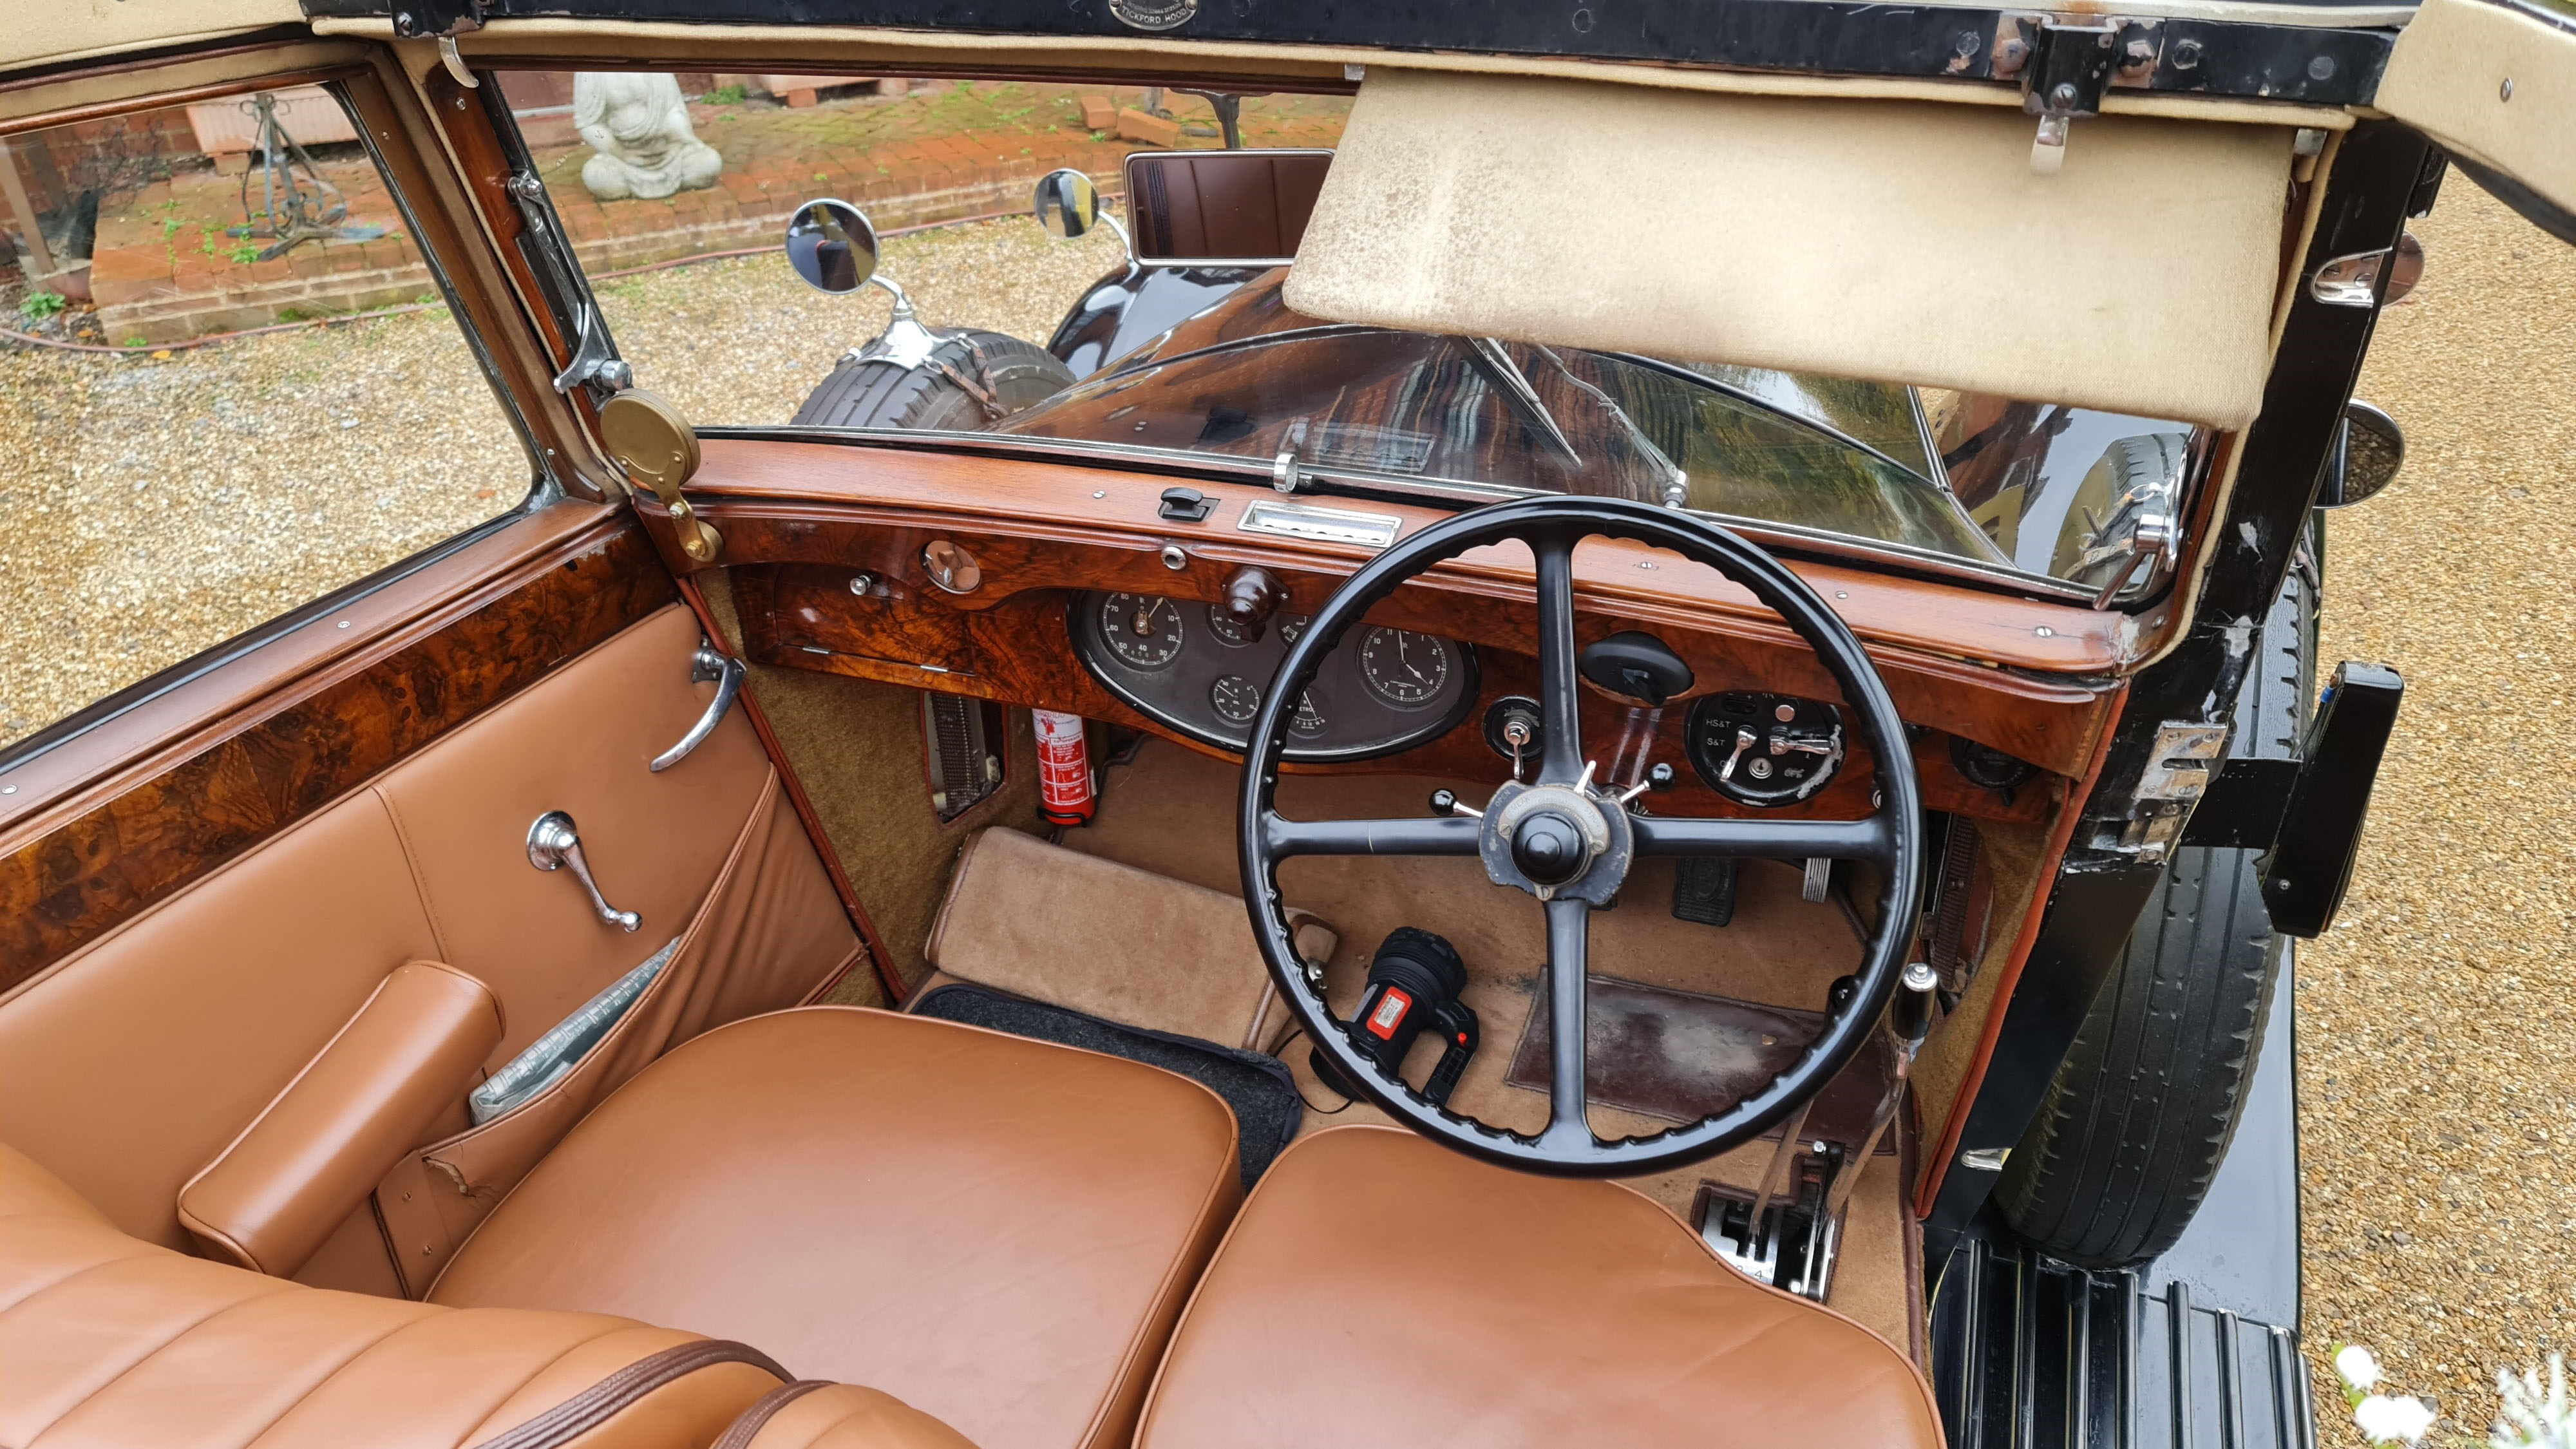 Rolls Royce 20/25 Convertible by Thrupp and Maberly